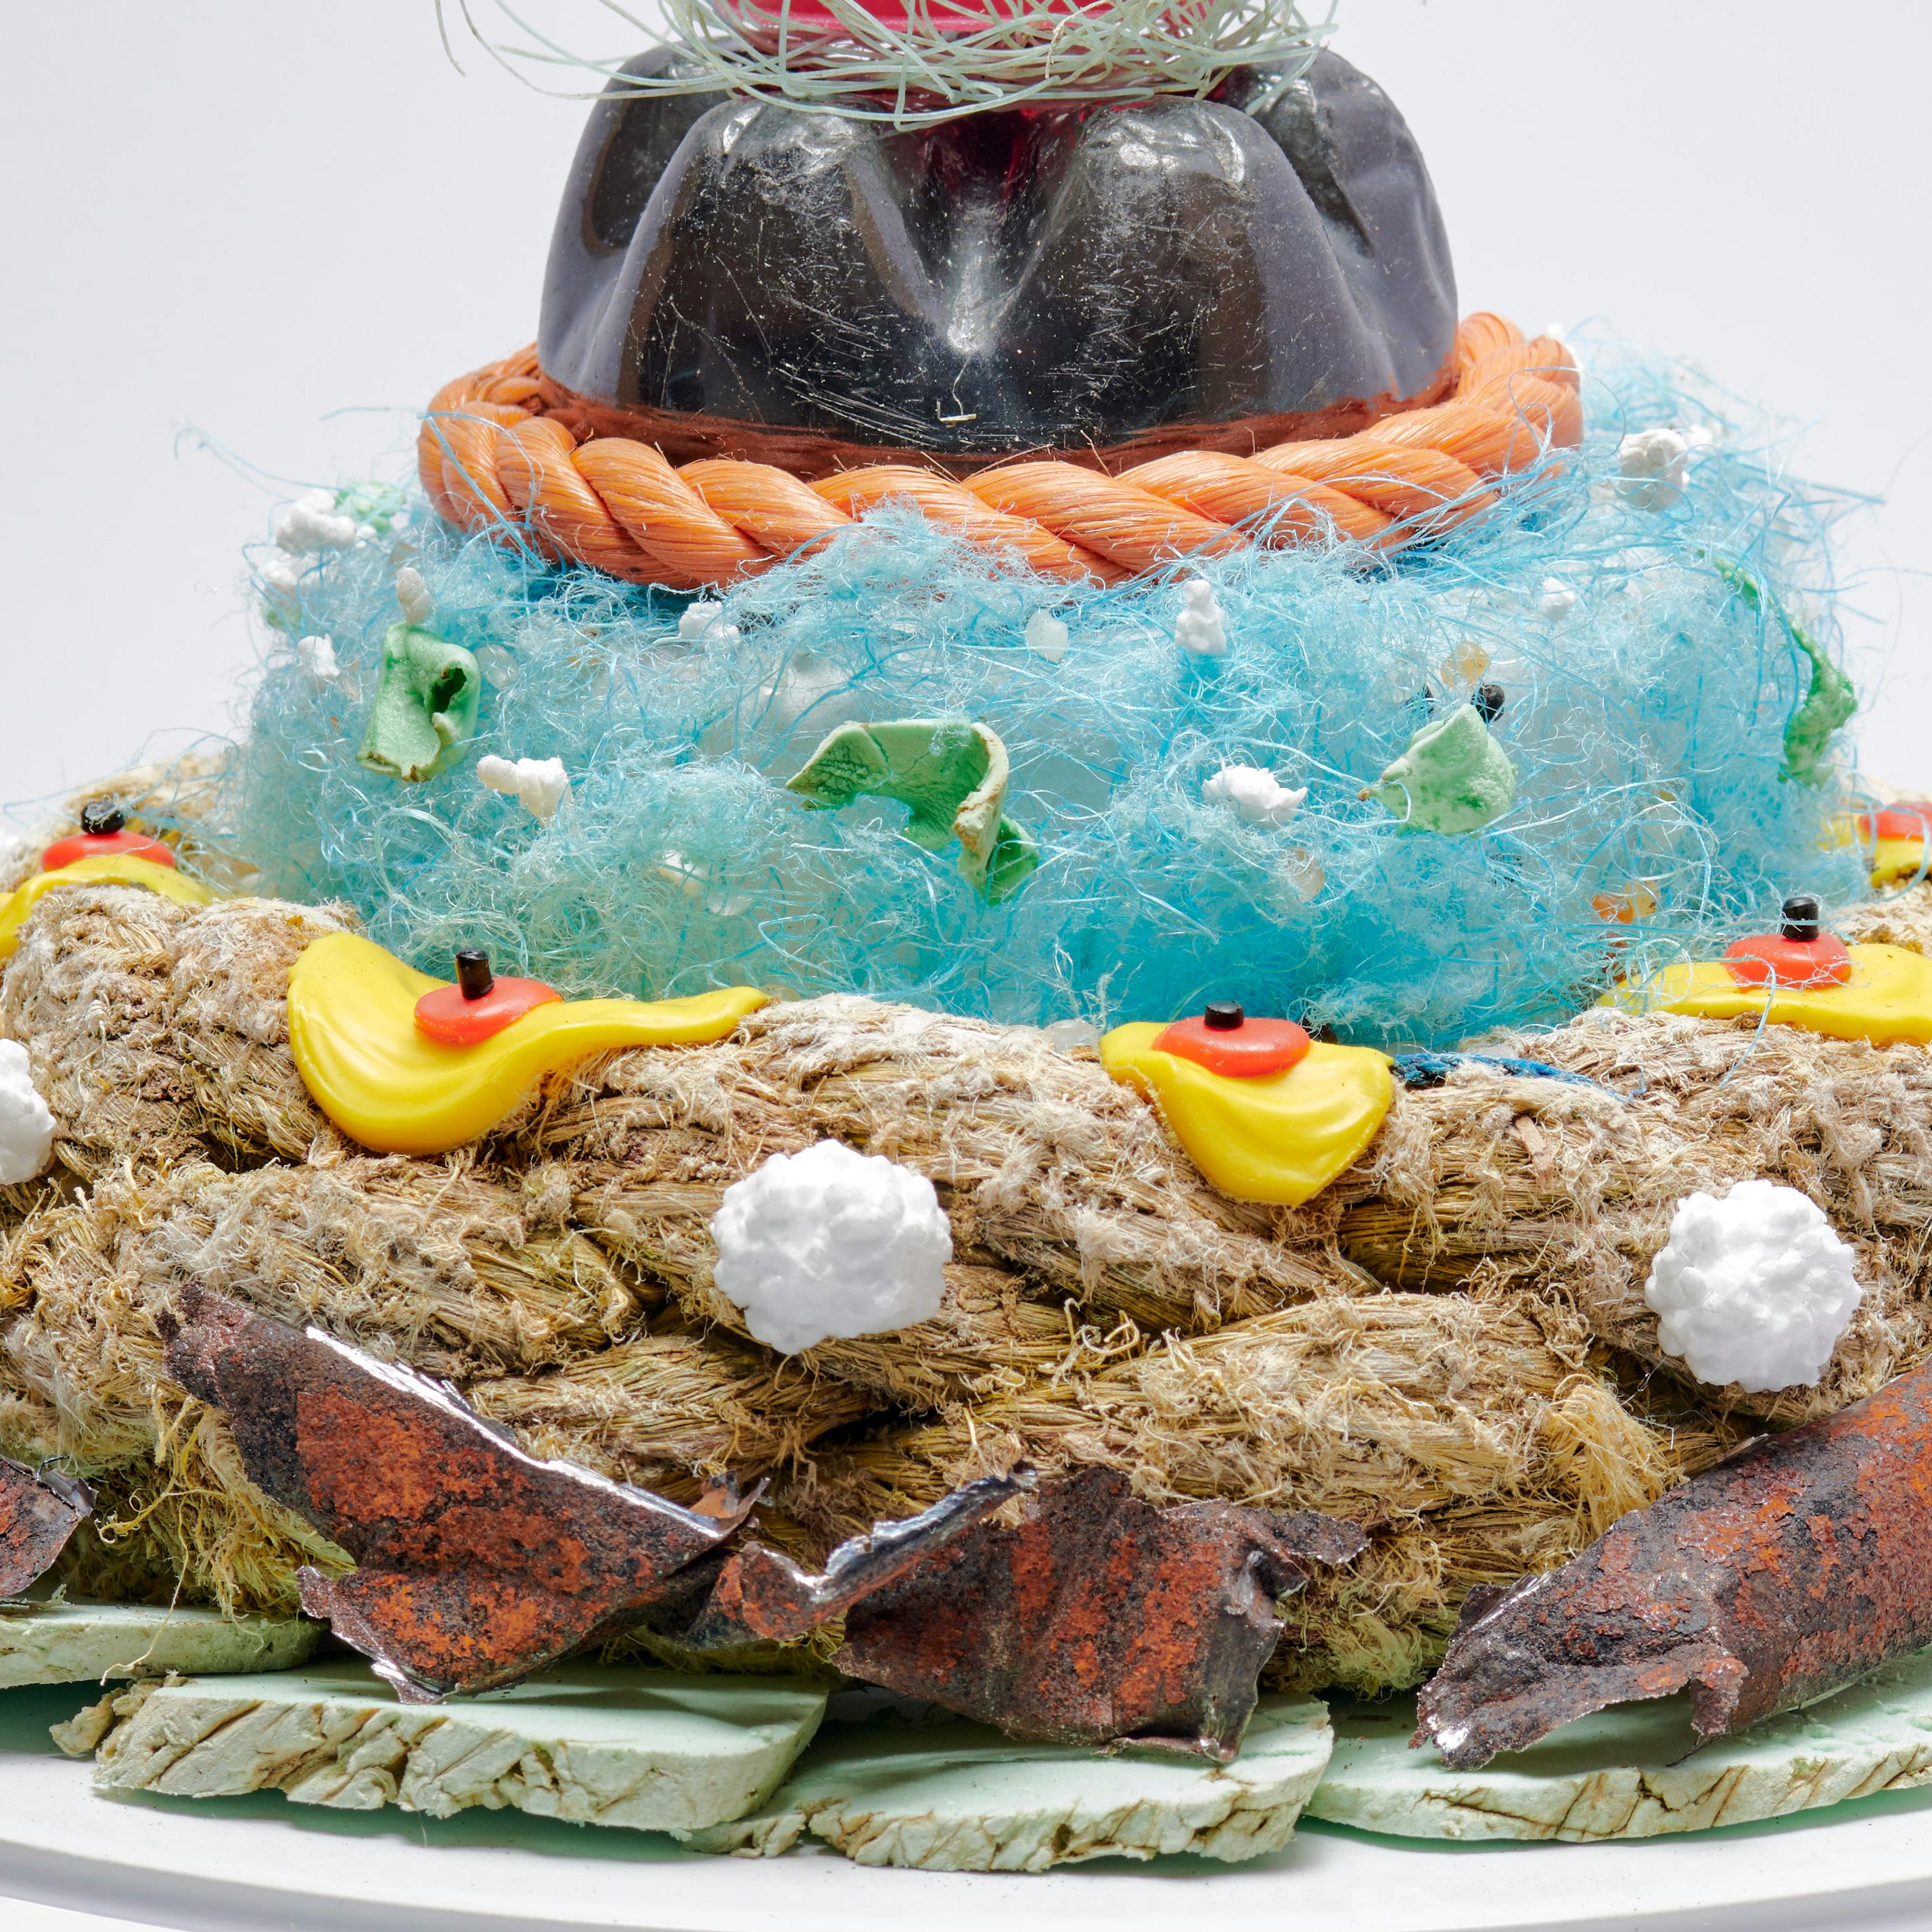 Photograph on C print.
The Cake is made from rest over waste ingredients found on the shore in the harbor in Rotterdam. Rubdish is a conceptual visualization of waste finding it’sway back onto your plate. It is the transformation of rubbish into an